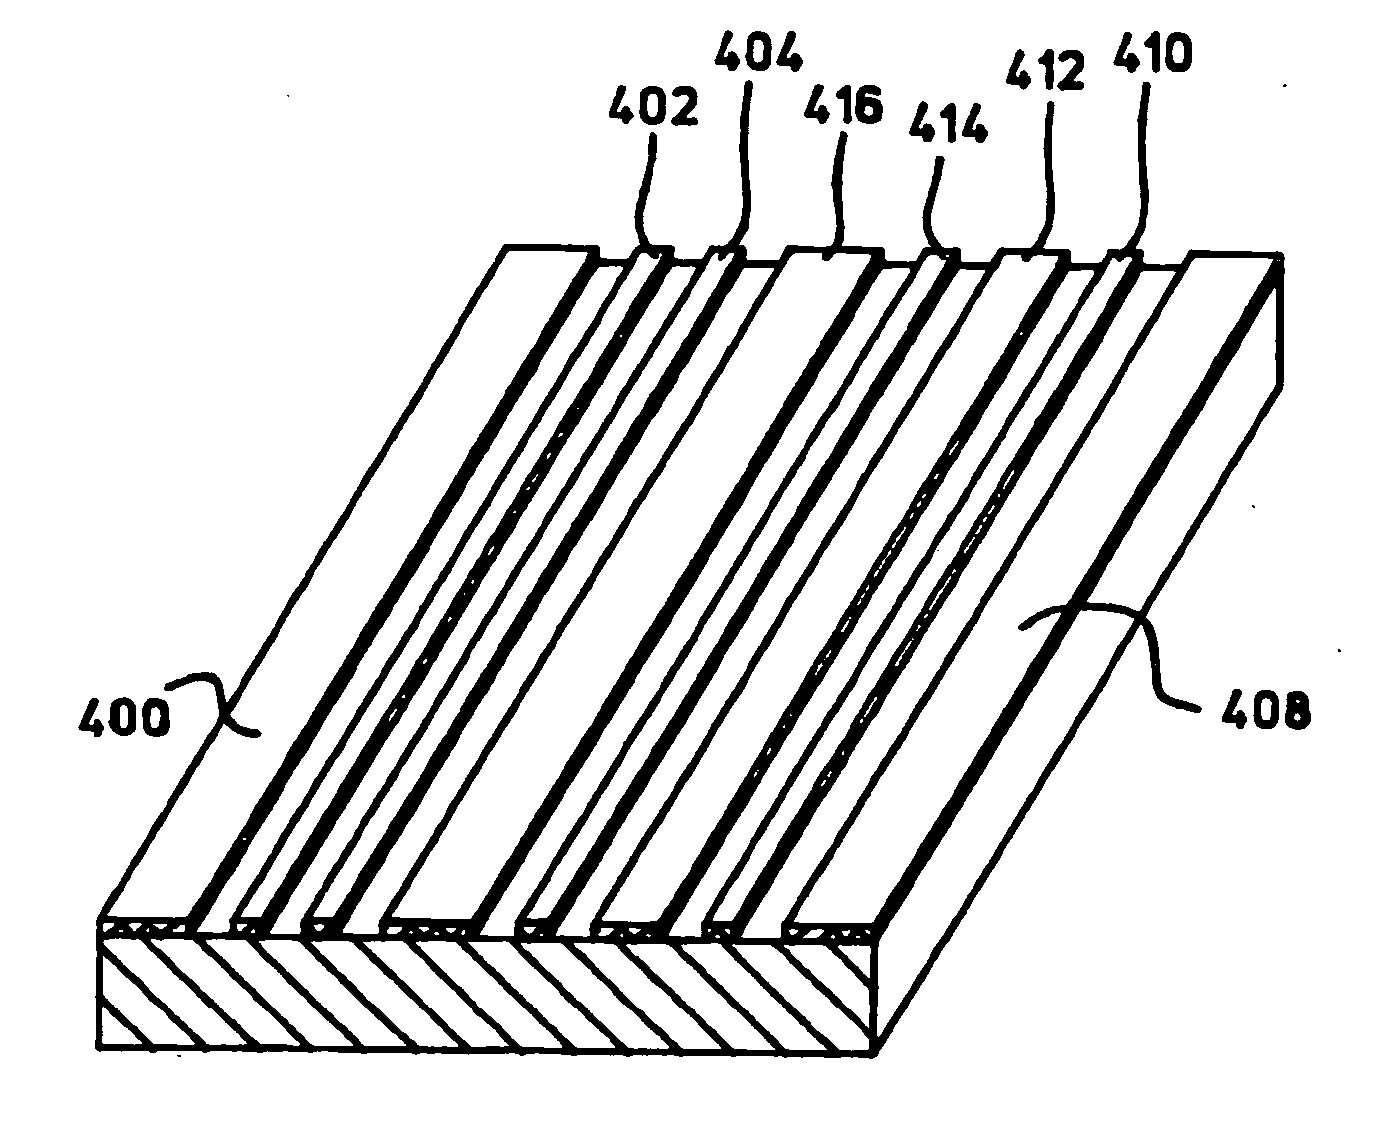 Flexible interconnect cable with coplanar waveguide